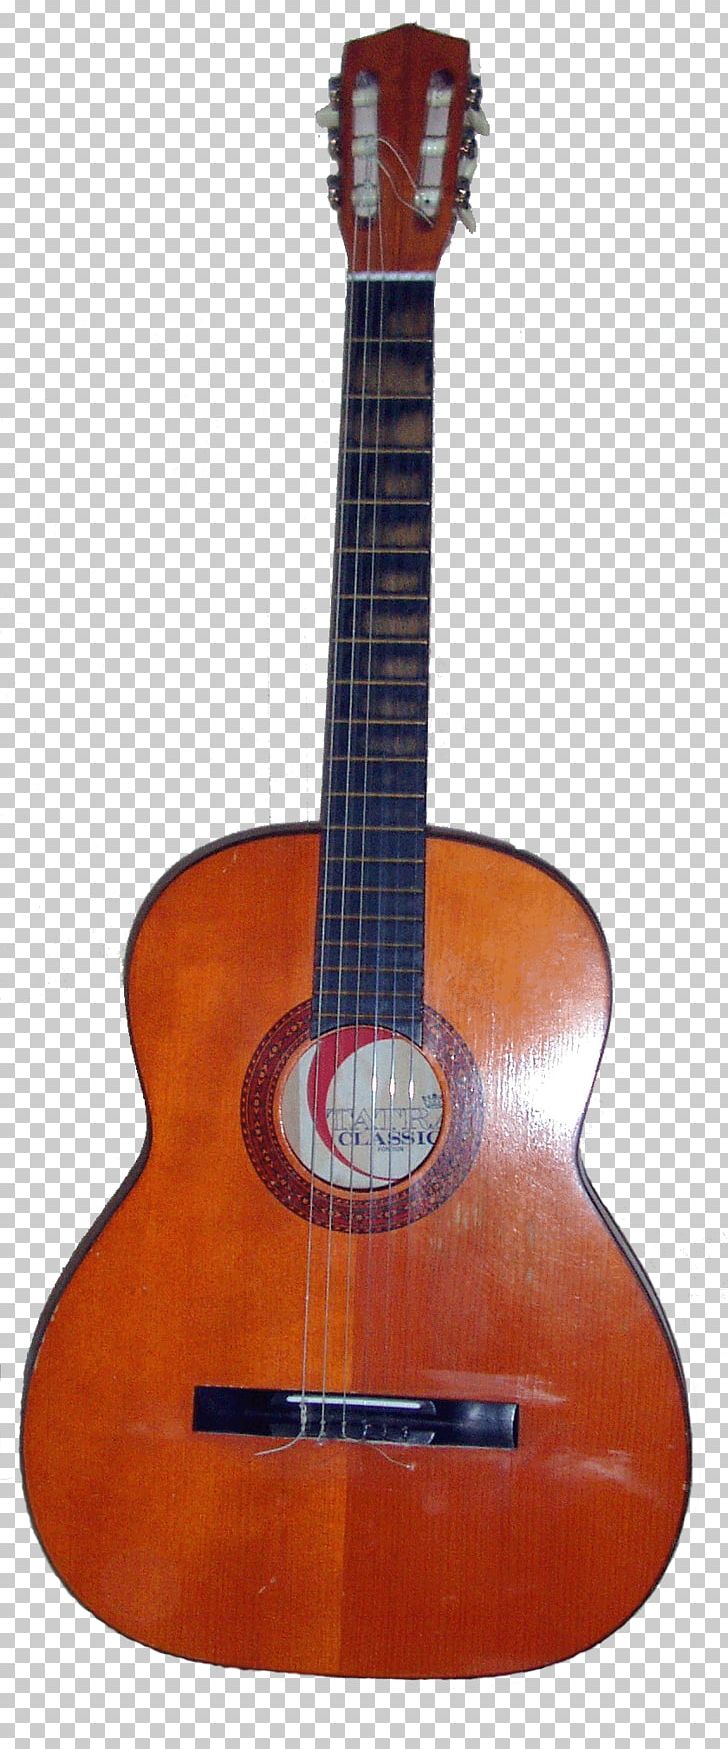 Classical Guitar Steel-string Acoustic Guitar Musical Instruments PNG, Clipart, Acoustic Electric Guitar, Classical Guitar, Cuatro, Guitar Accessory, Guitarist Free PNG Download